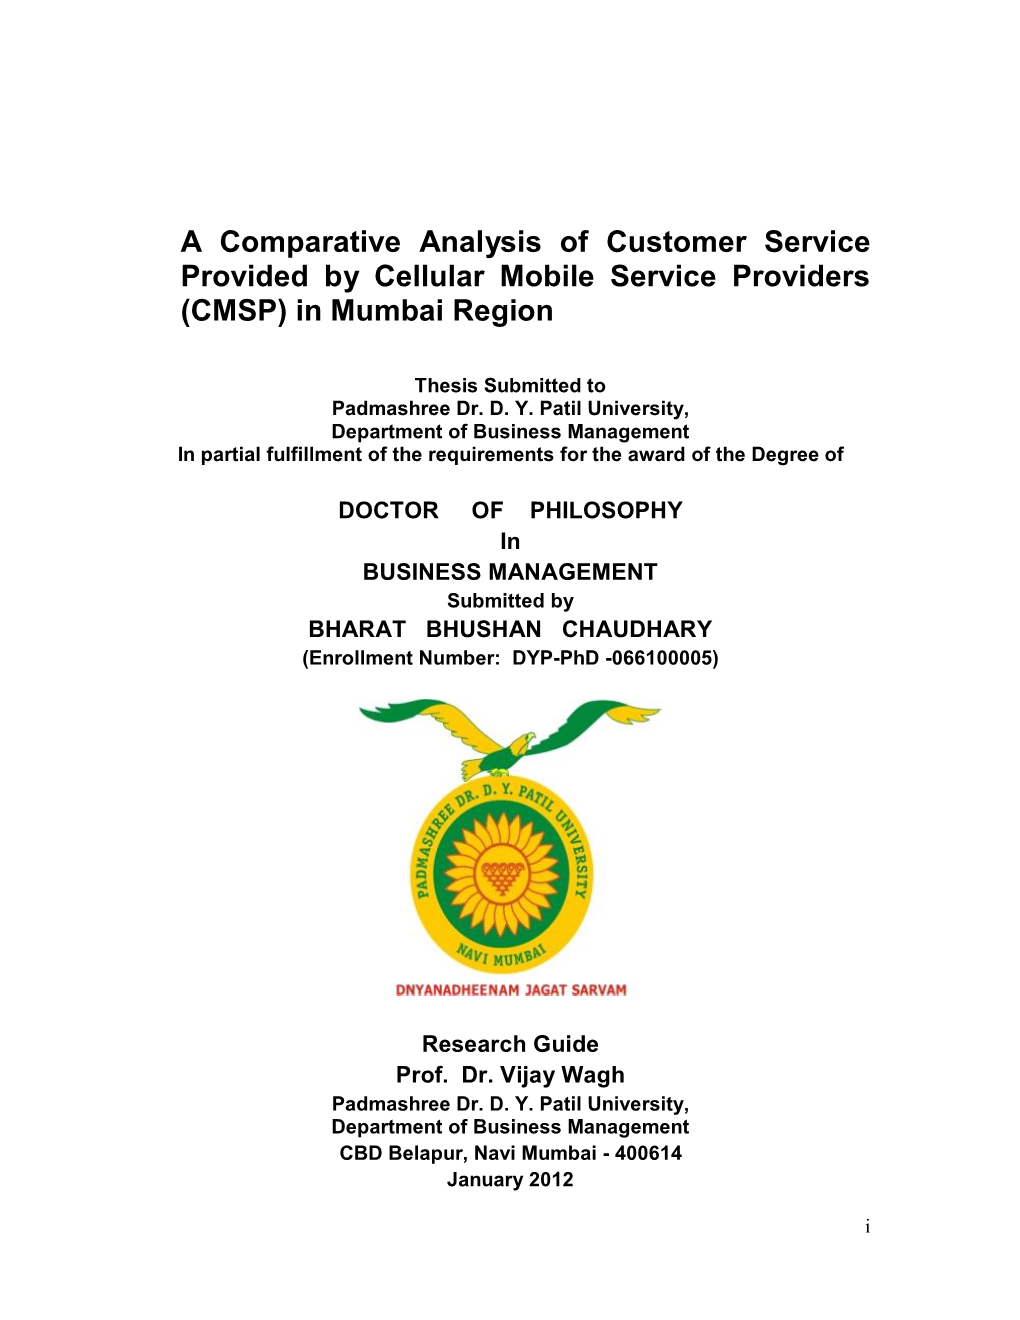 A Comparative Analysis of Customer Service Provided by Cellular Mobile Service Providers (CMSP) in Mumbai Region